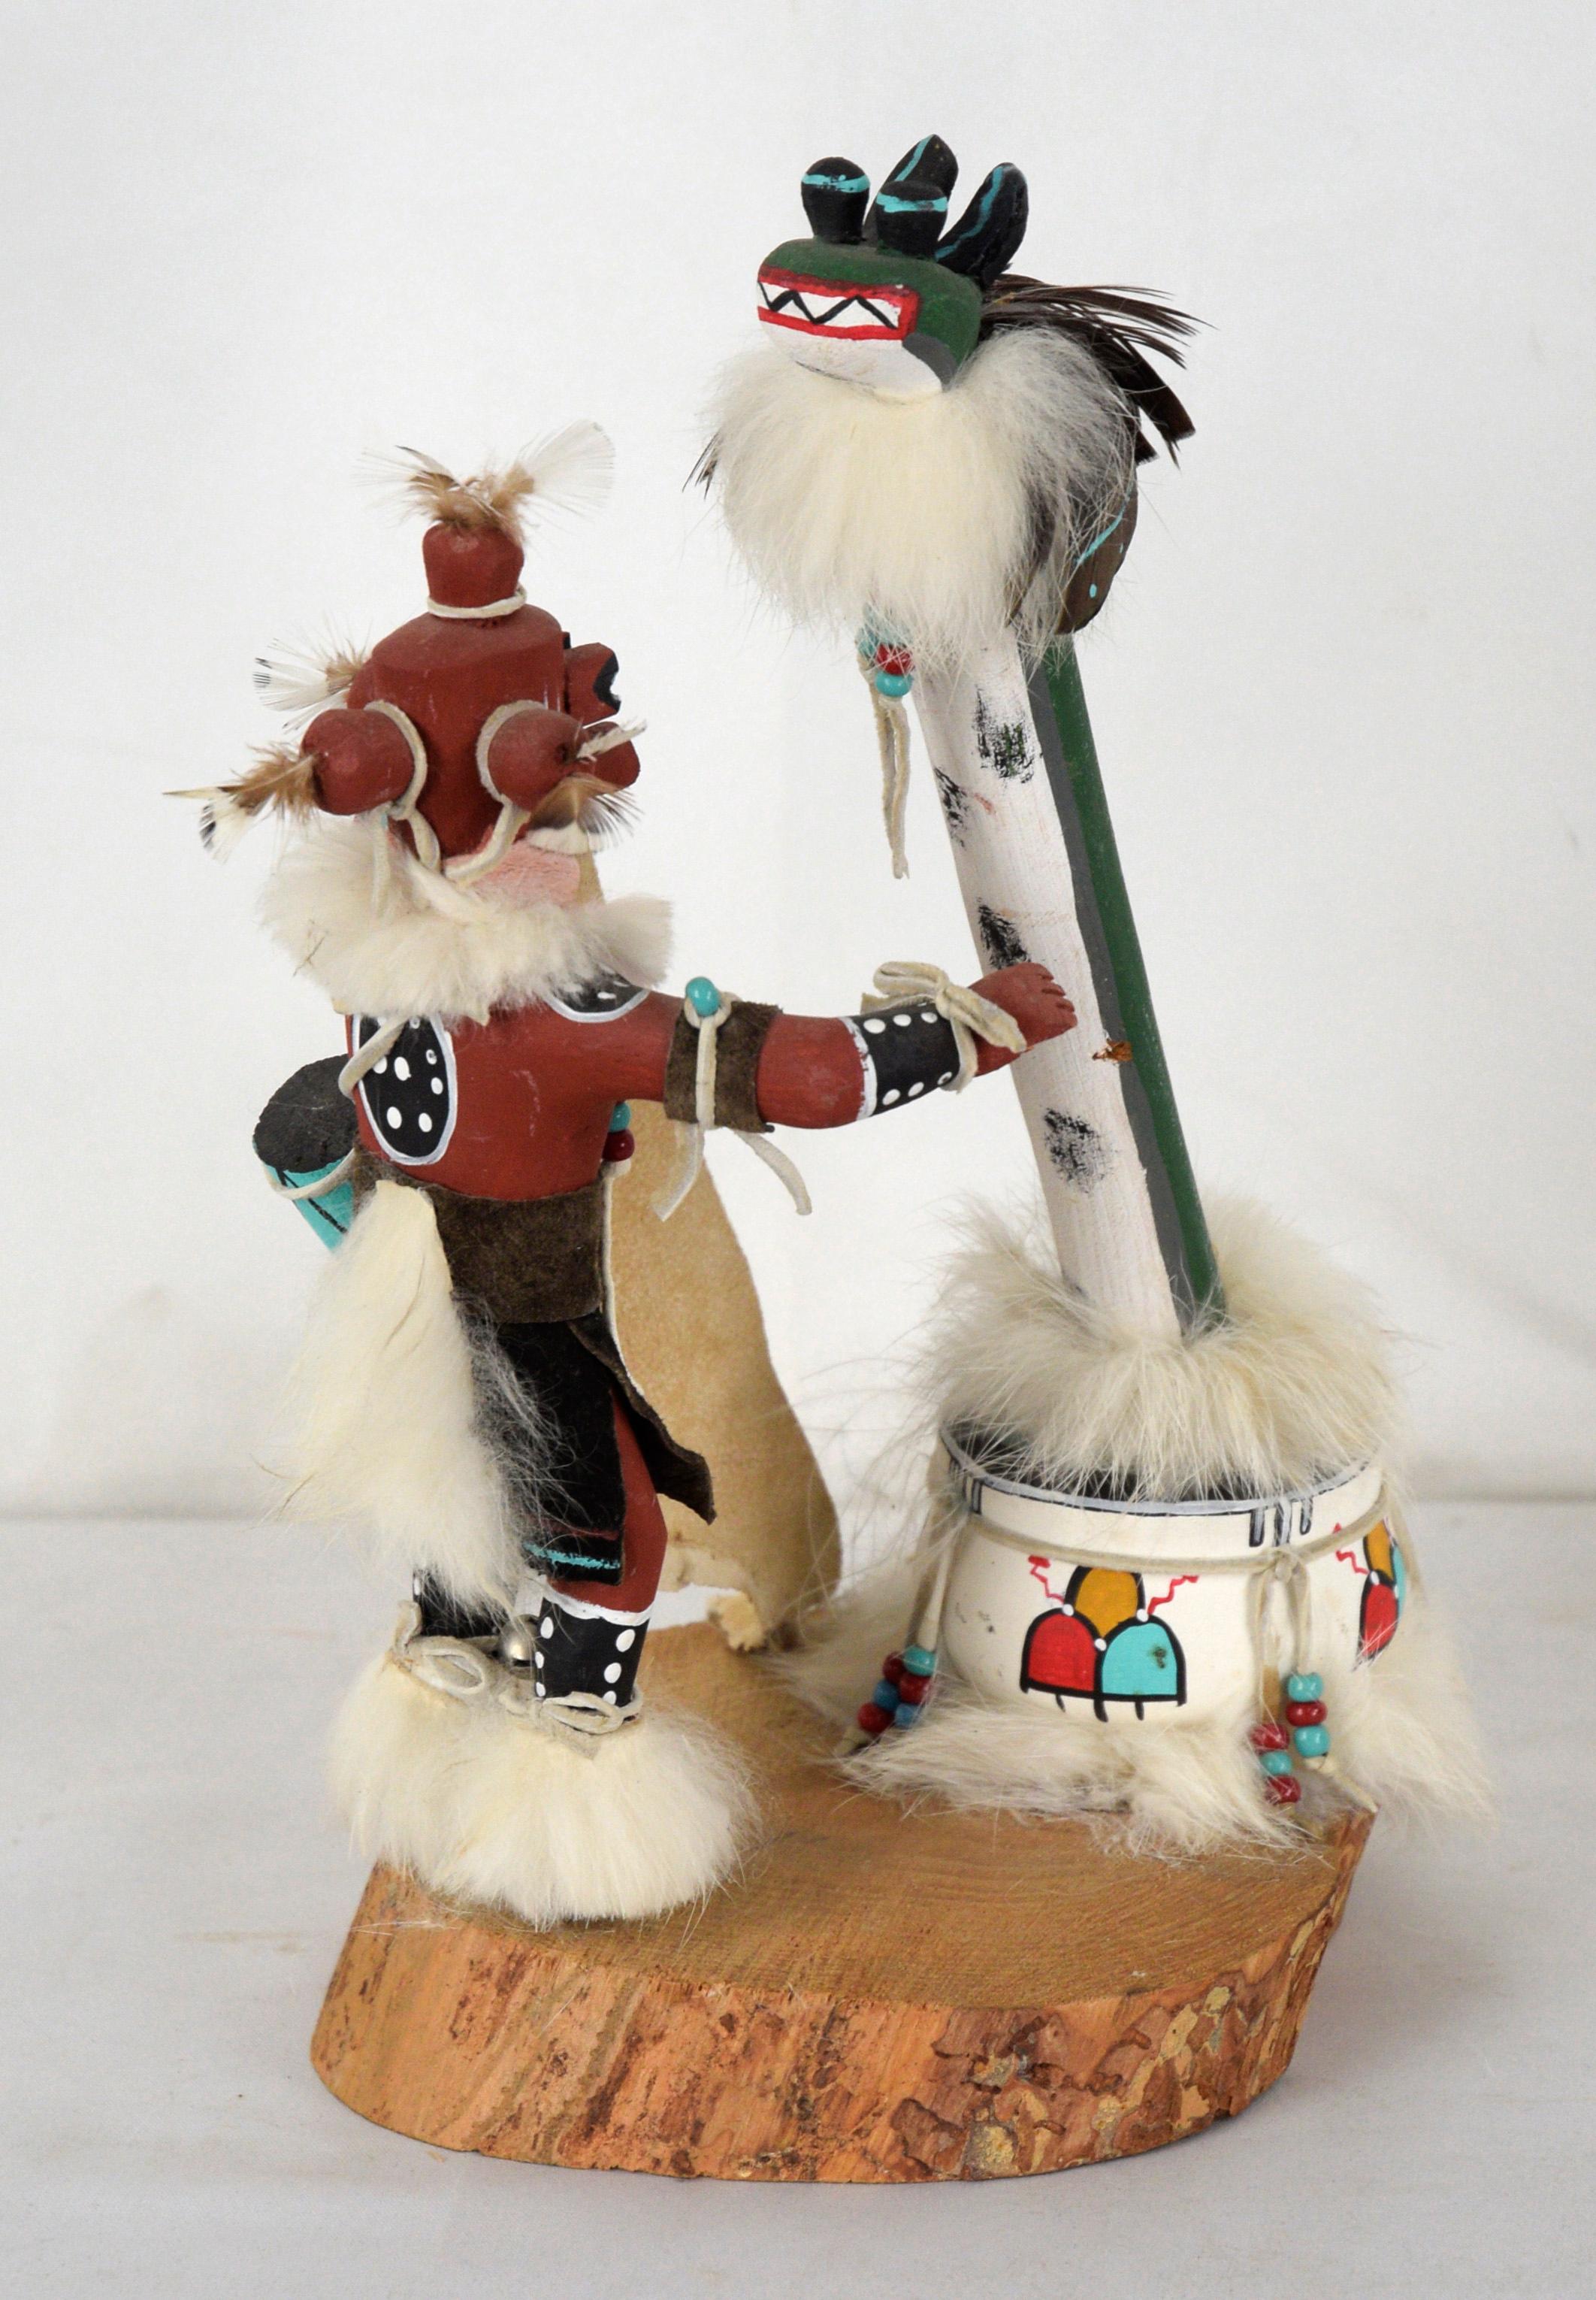 Water Serpent (Palulukang) and Mud Man (Koyemsi) - Kachina Doll

Brightly painted, dynamic sculpture by an unknown artist. The figure is dressed as a medicine man, with feather and fur accents. The Mud Man is holding a piece of leather and a drum,